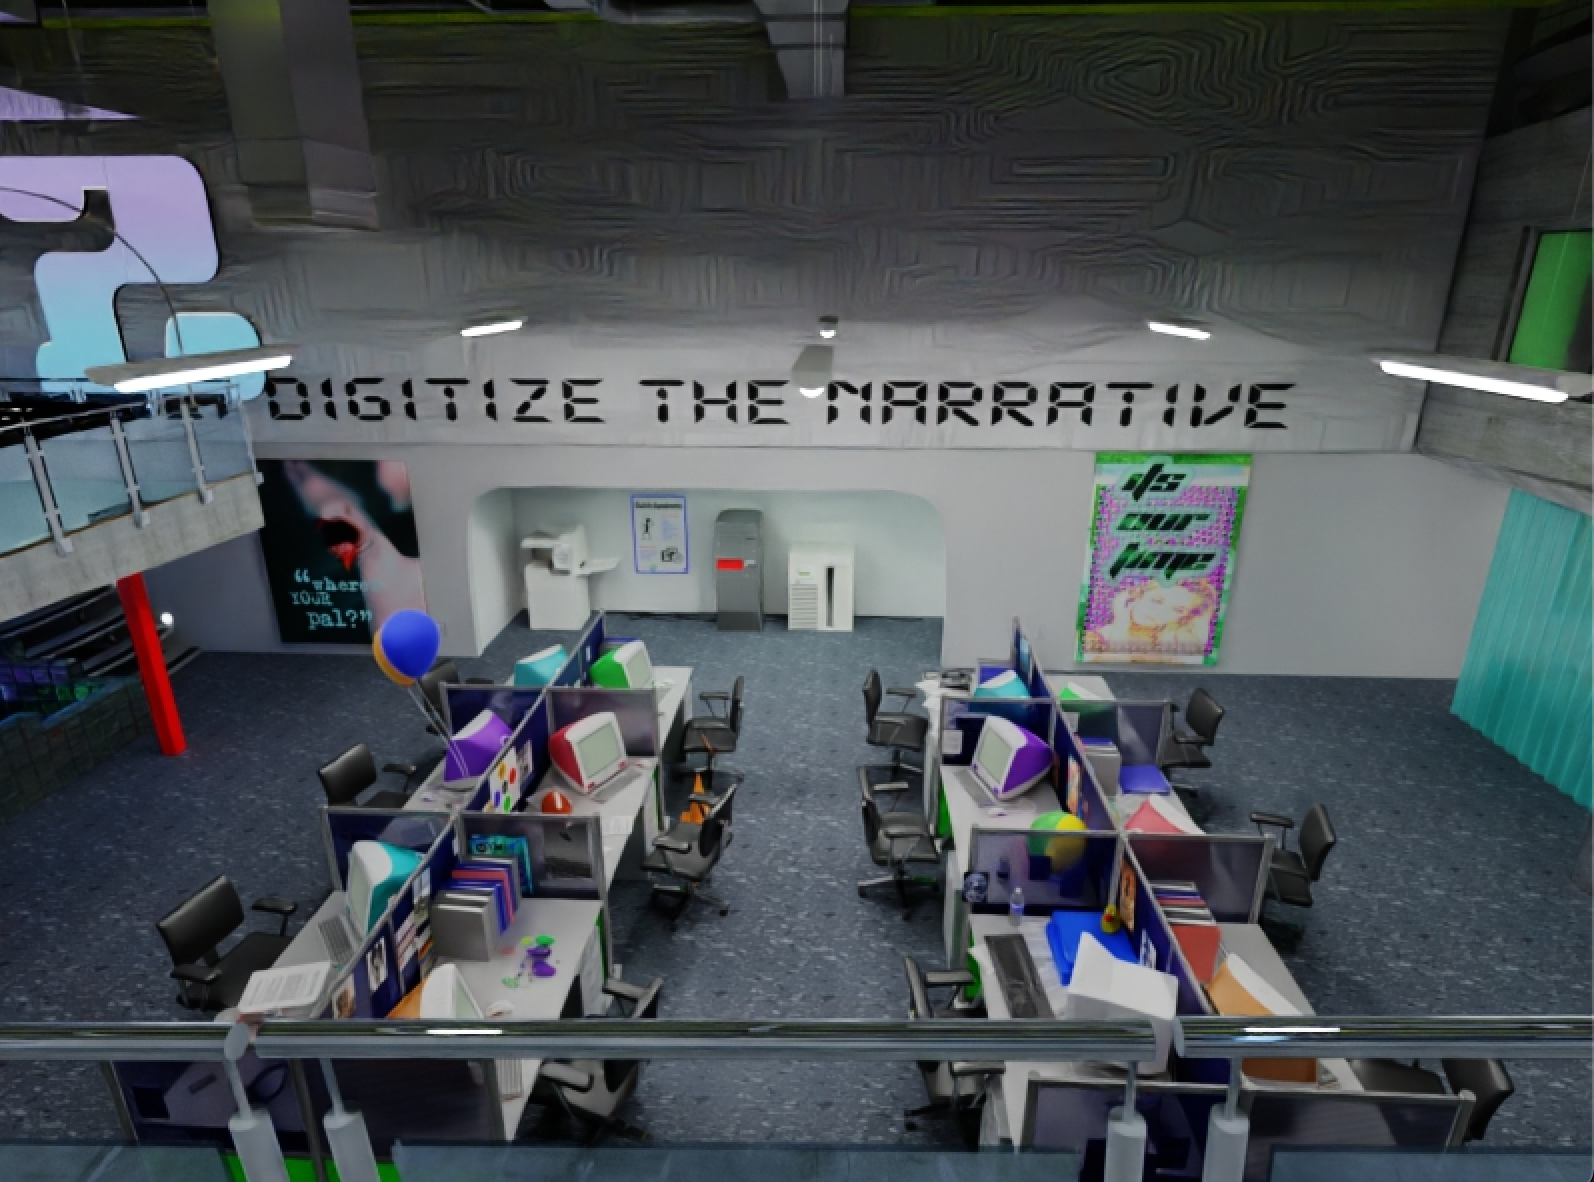 An overhead view within the Zentropy HQ, with a mural in the background that reads "Digitize the narrative".